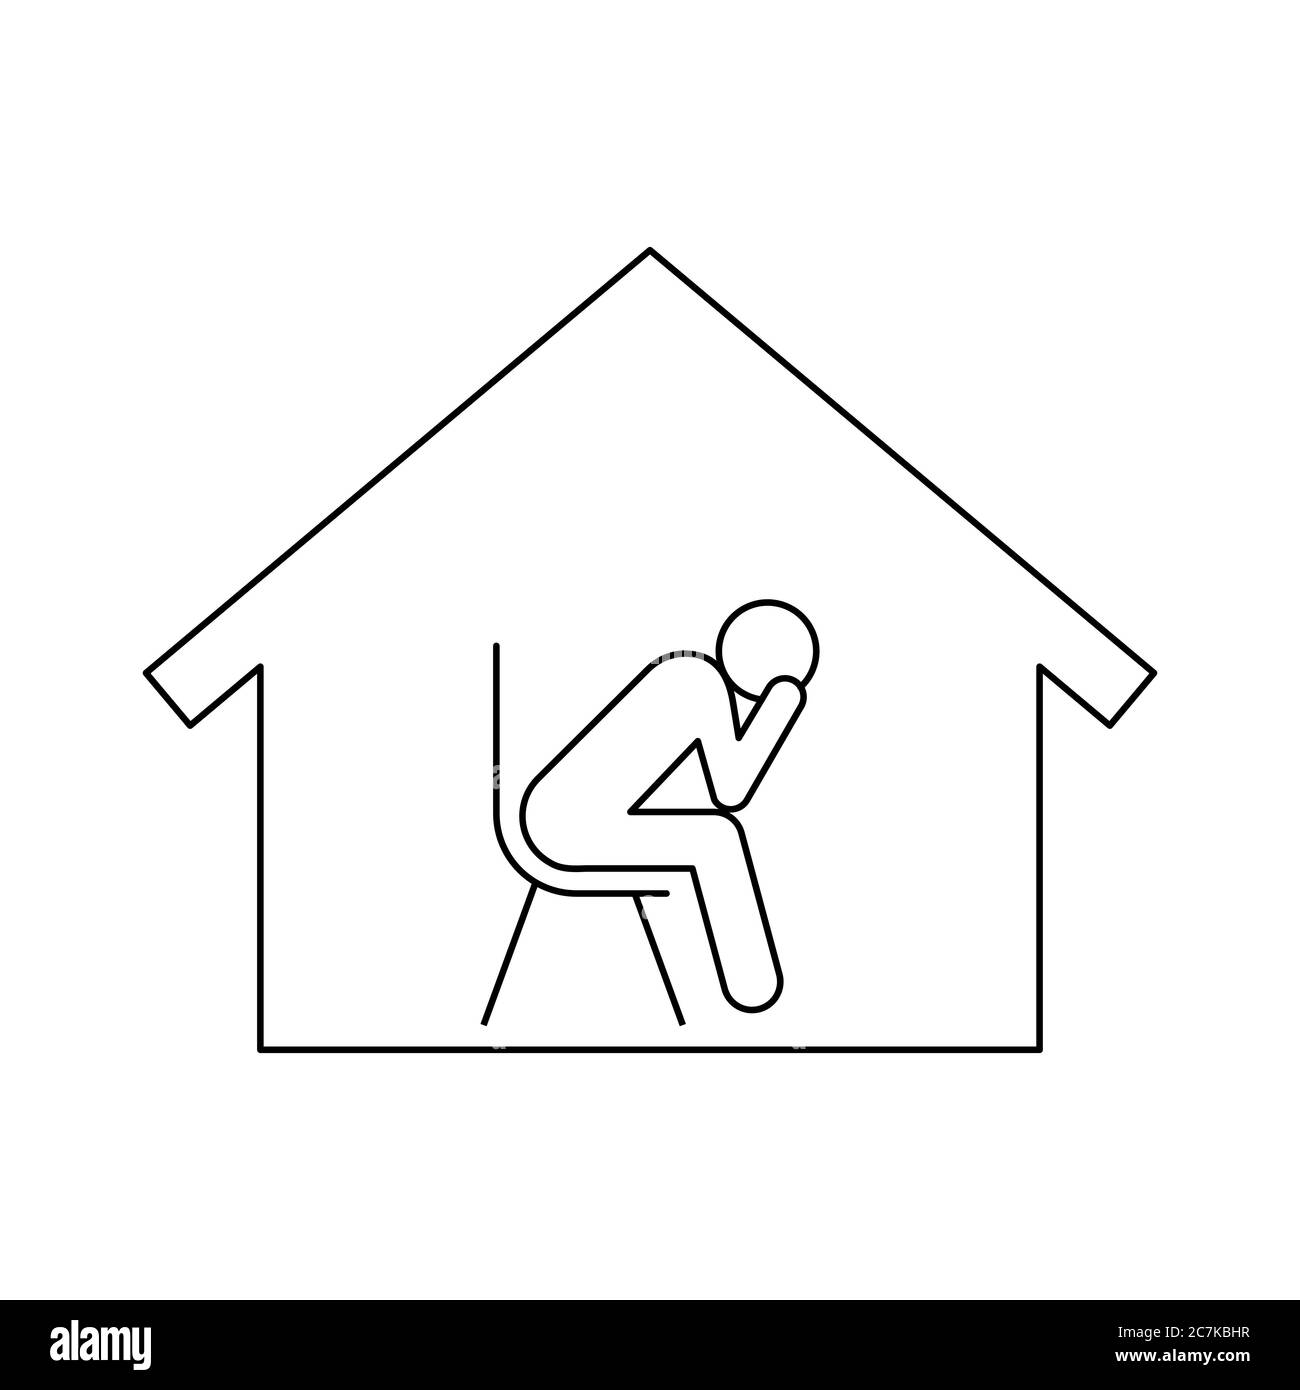 Sad man in house line icon. Self isolation during Covid-19 pandemic. Coronavirus quarantine anxiety and depression. Stickman figure sits. Vector Stock Vector